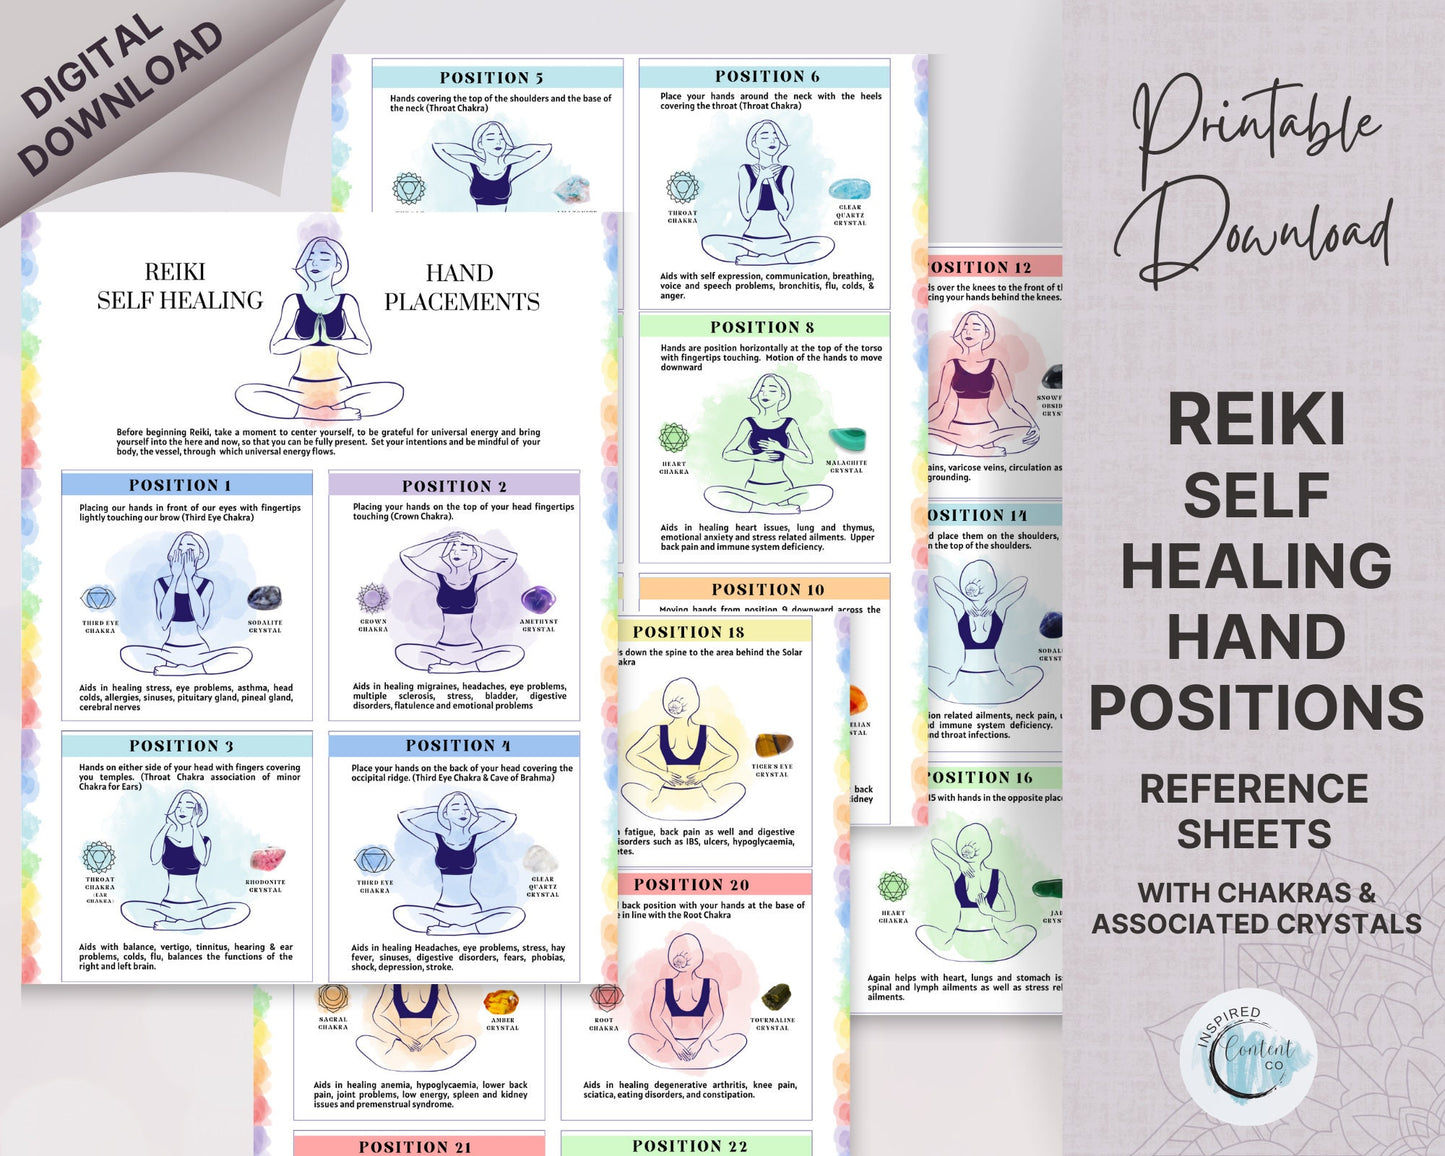 Reiki Hand Positions for Self Healing Usui Reiki Chart, Reiki Healing Charts, Reiki Hand Placement Reference, Reiki Crystals & hand position